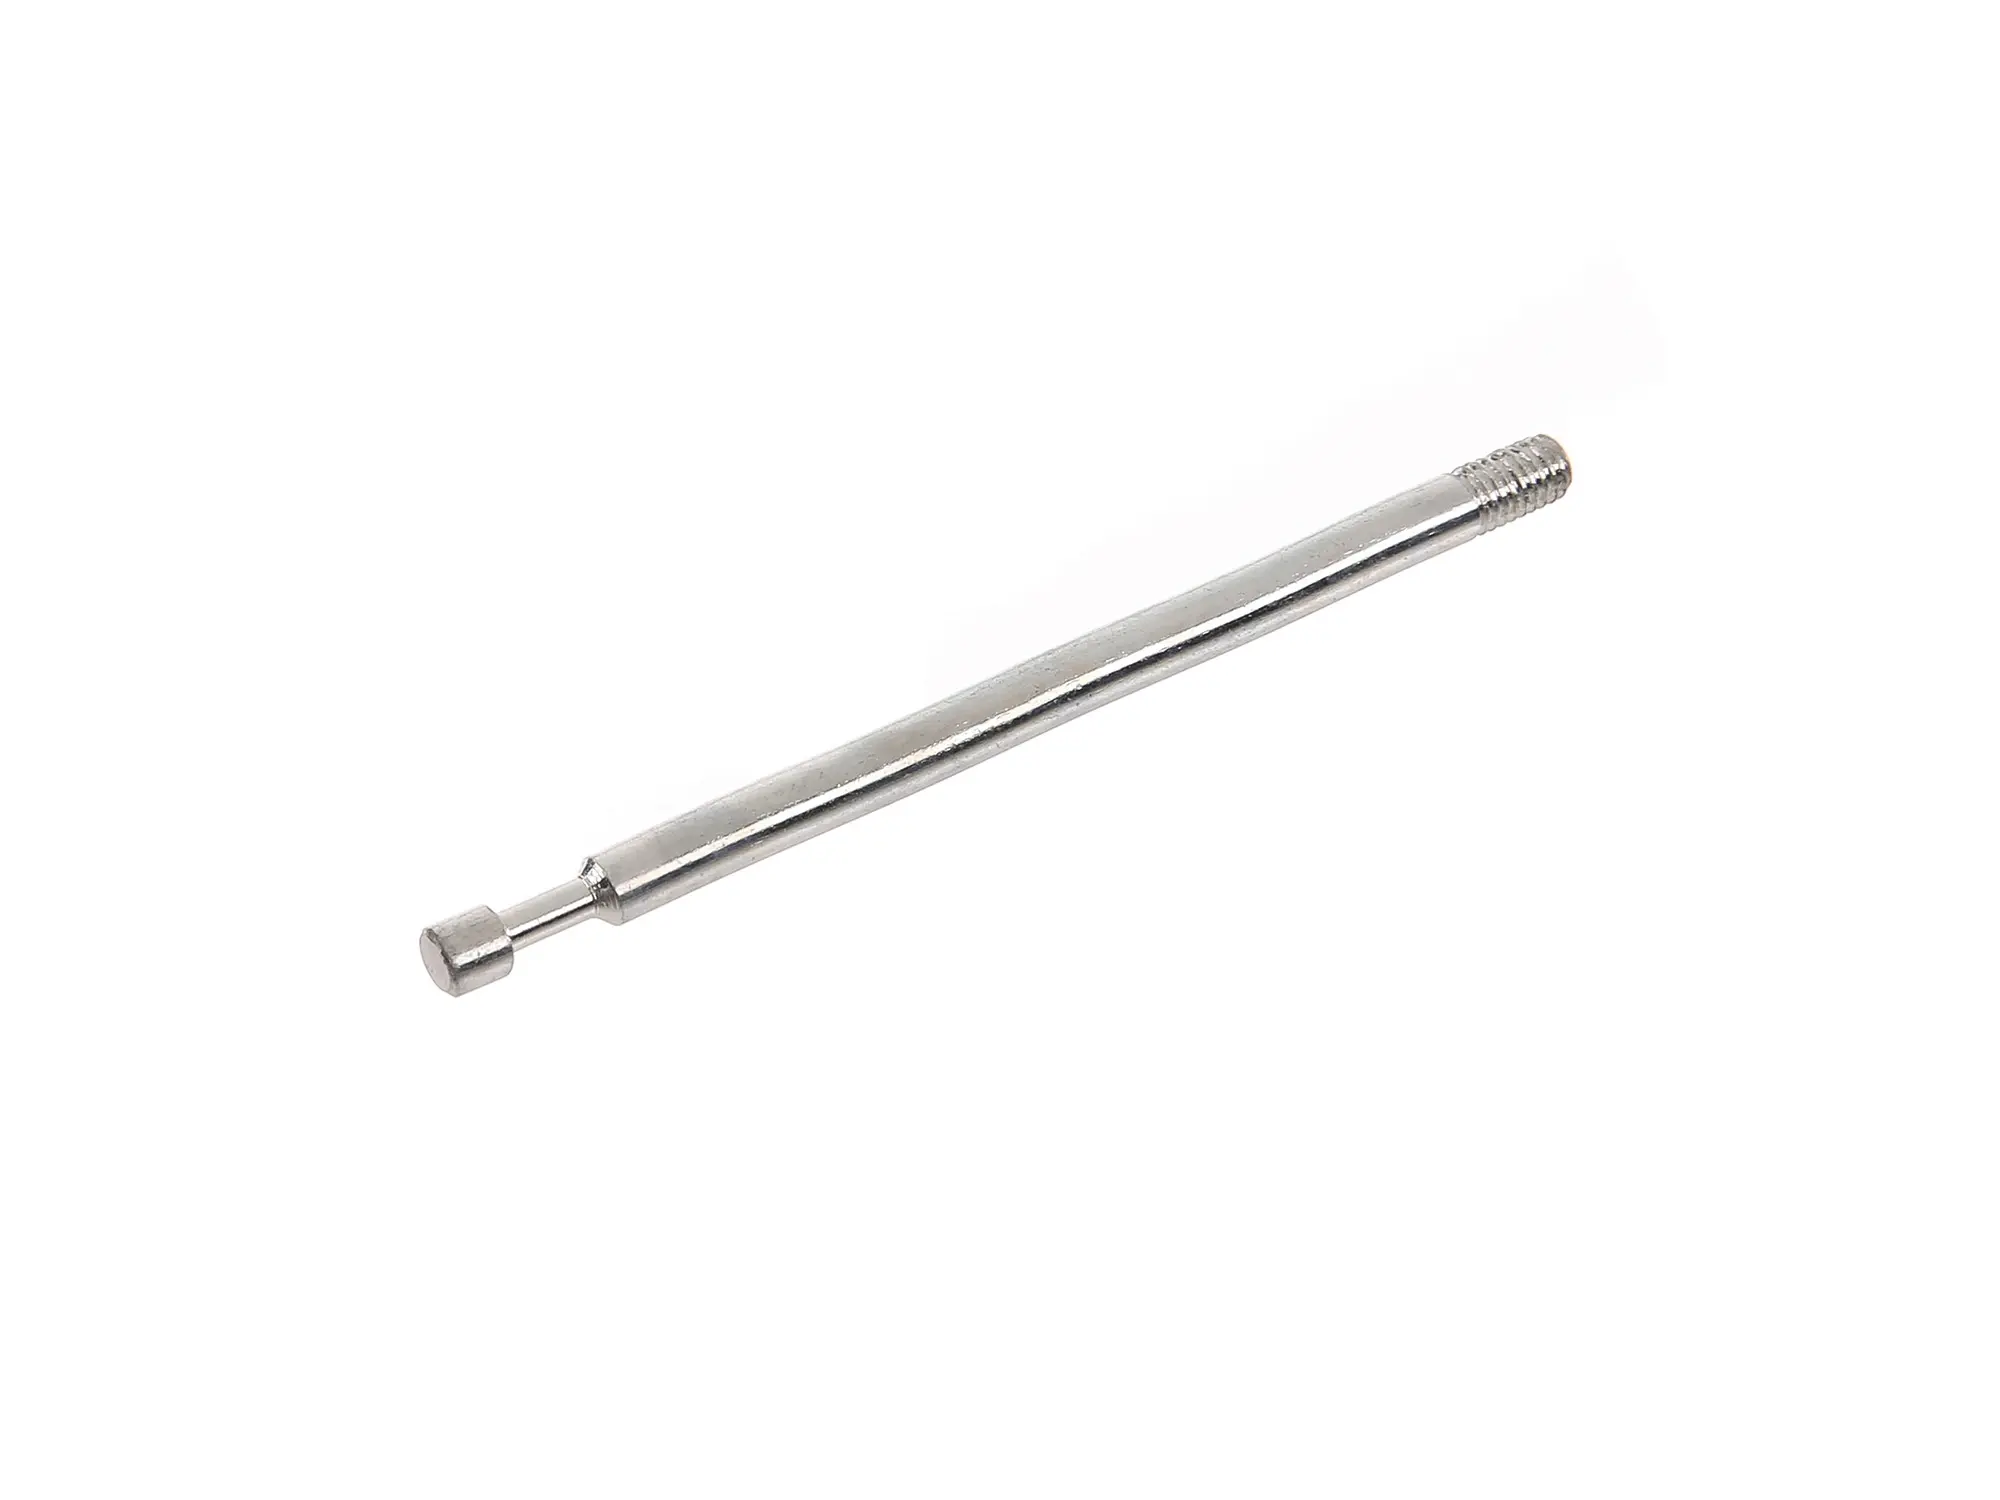 Hanging pin for gas slide (carburettor) suitable for BK350, Item no: 10055917 - Image 1